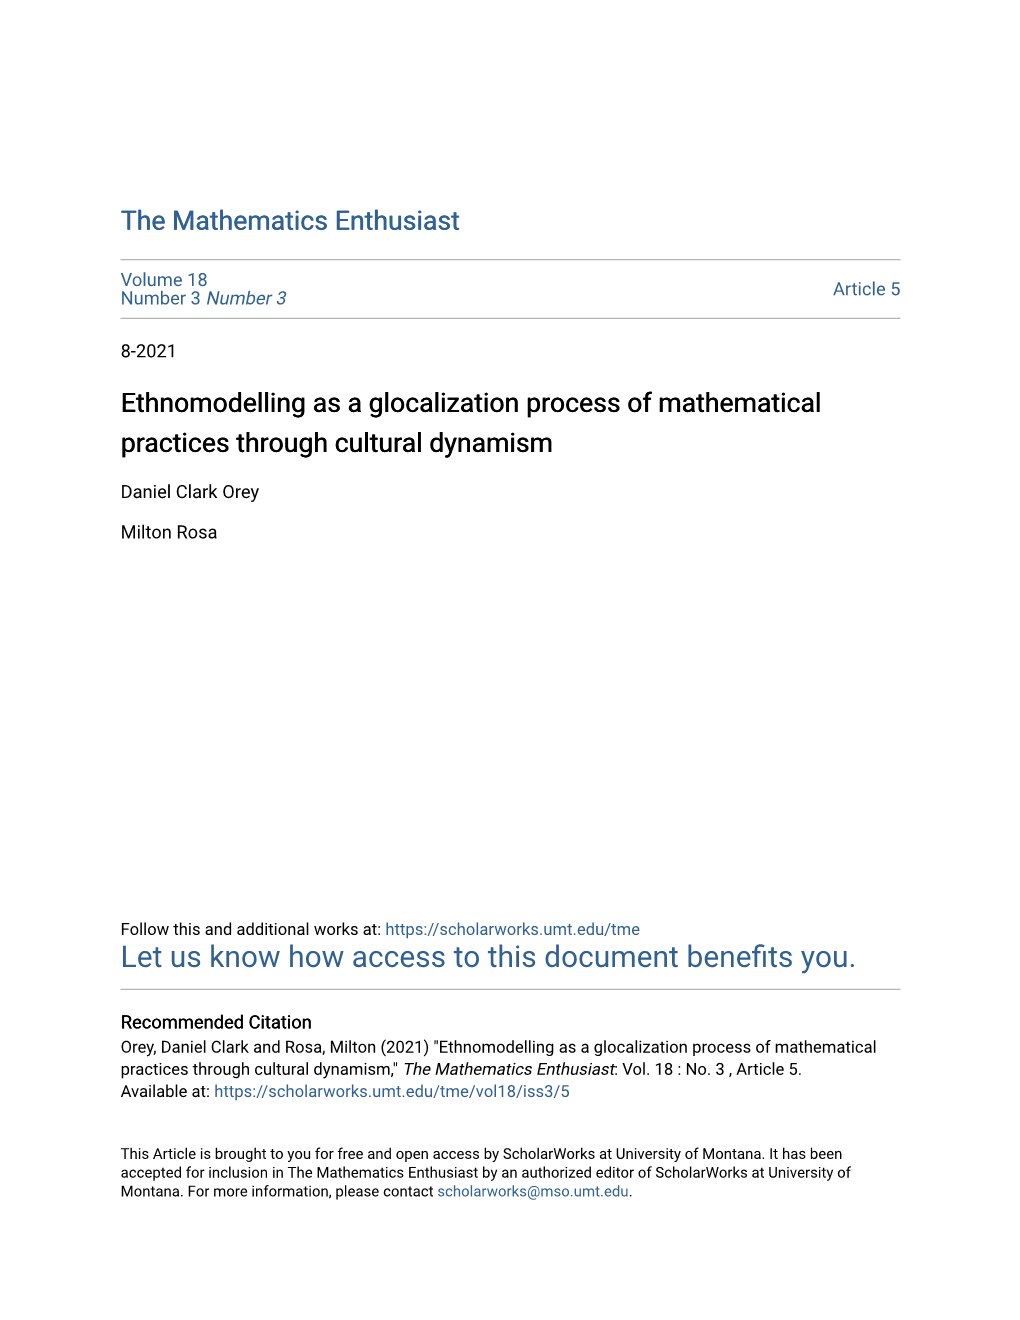 Ethnomodelling As a Glocalization Process of Mathematical Practices Through Cultural Dynamism